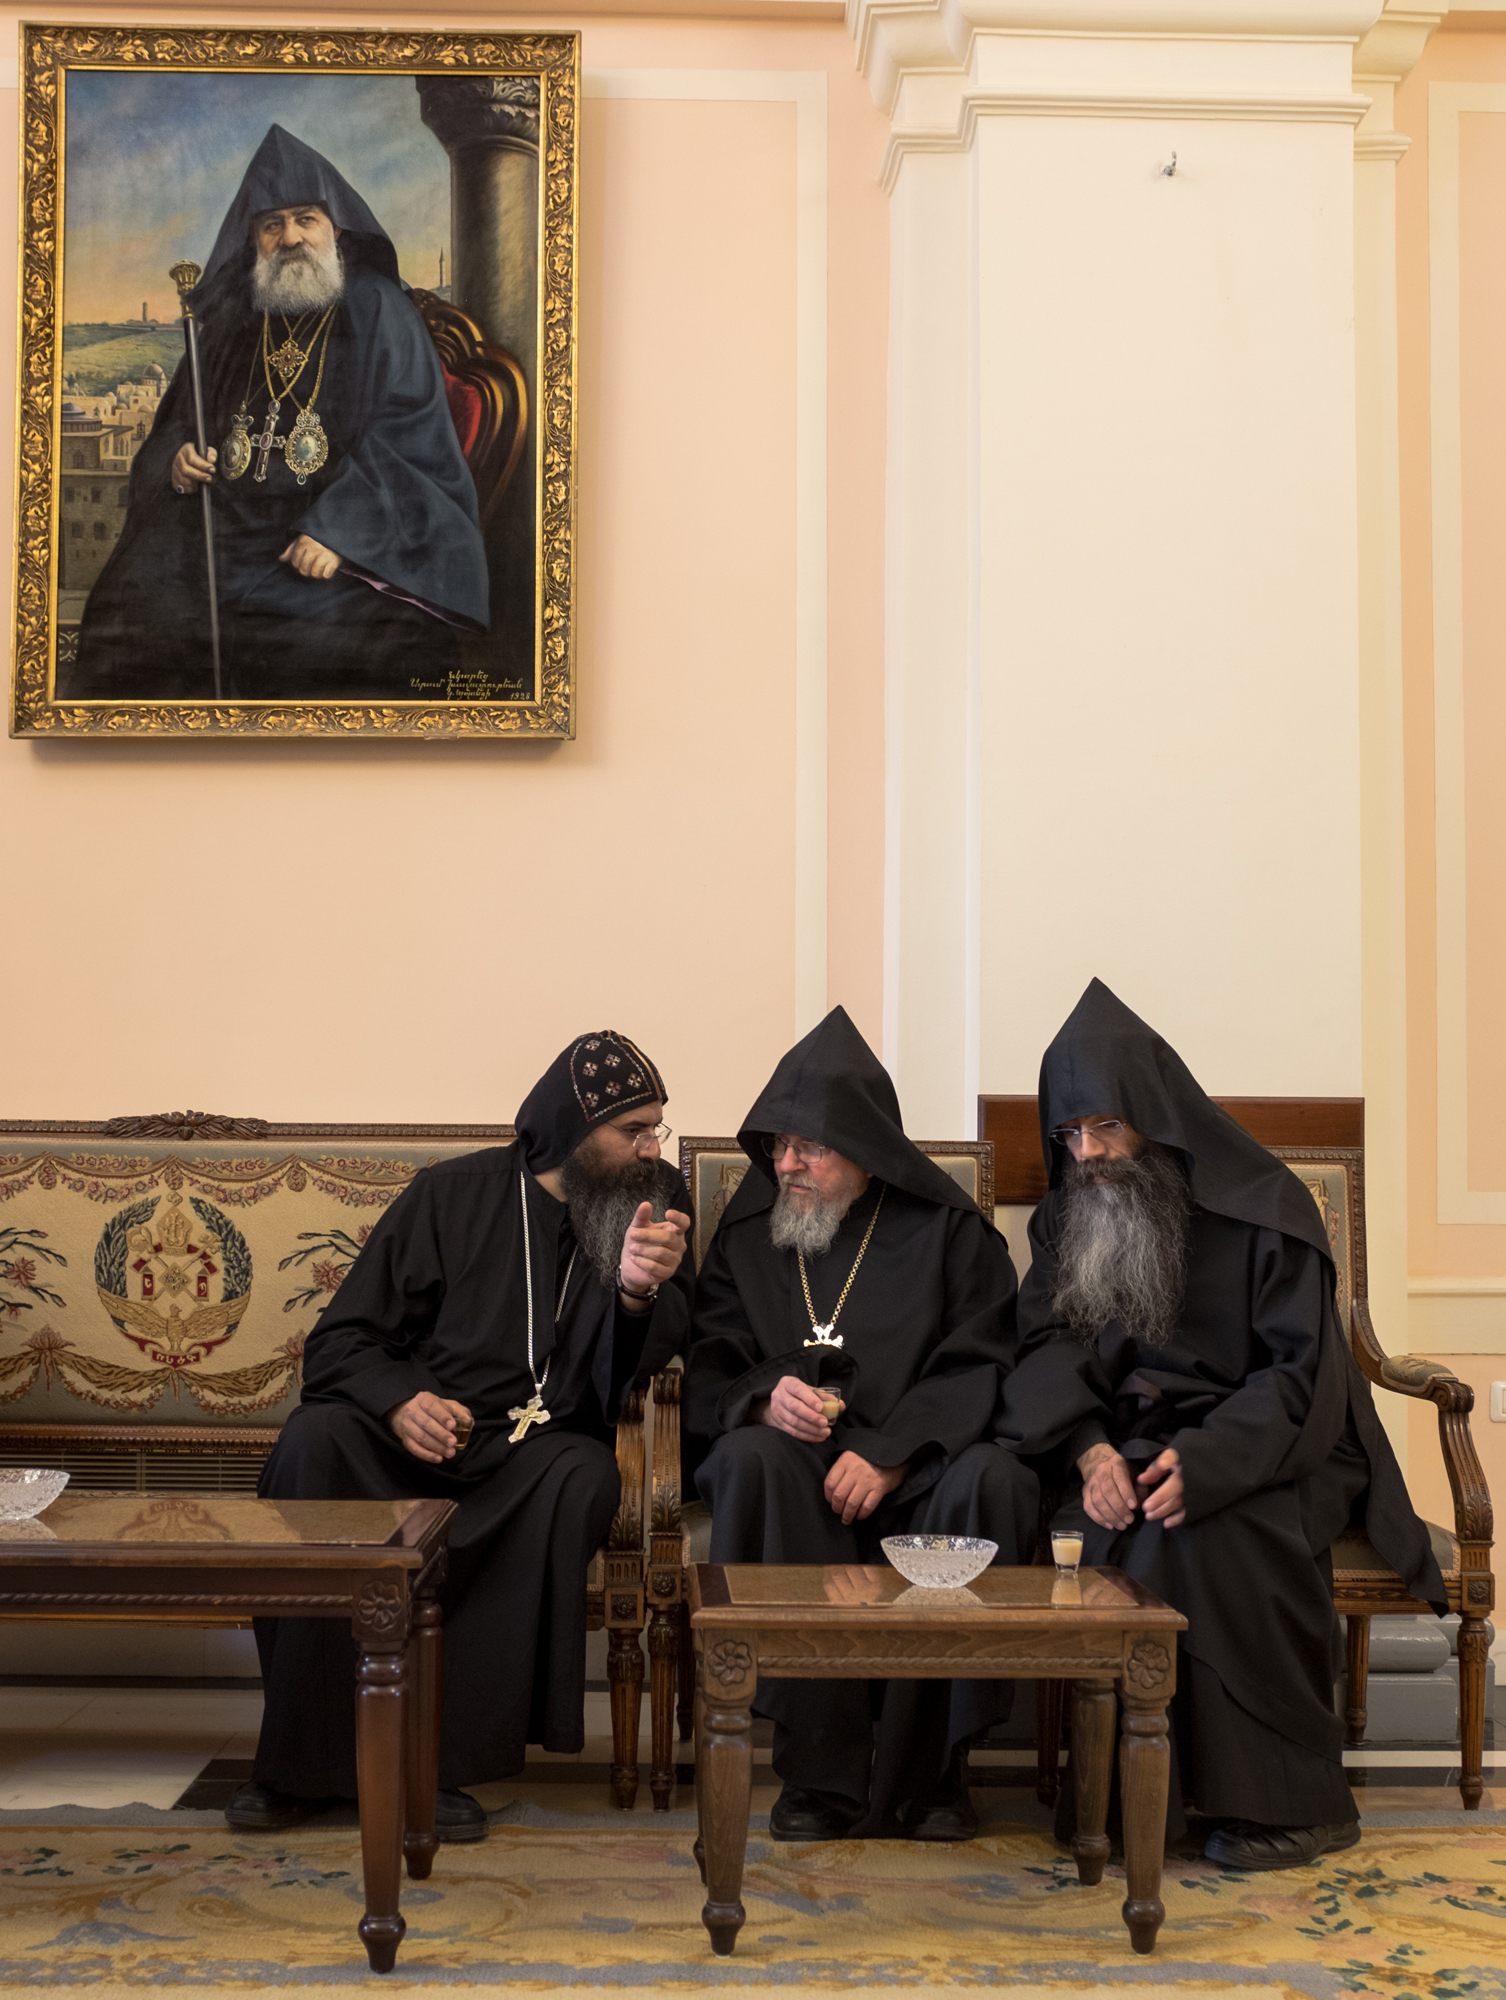 Coptic and Armenian monks talk during an Easter gathering.